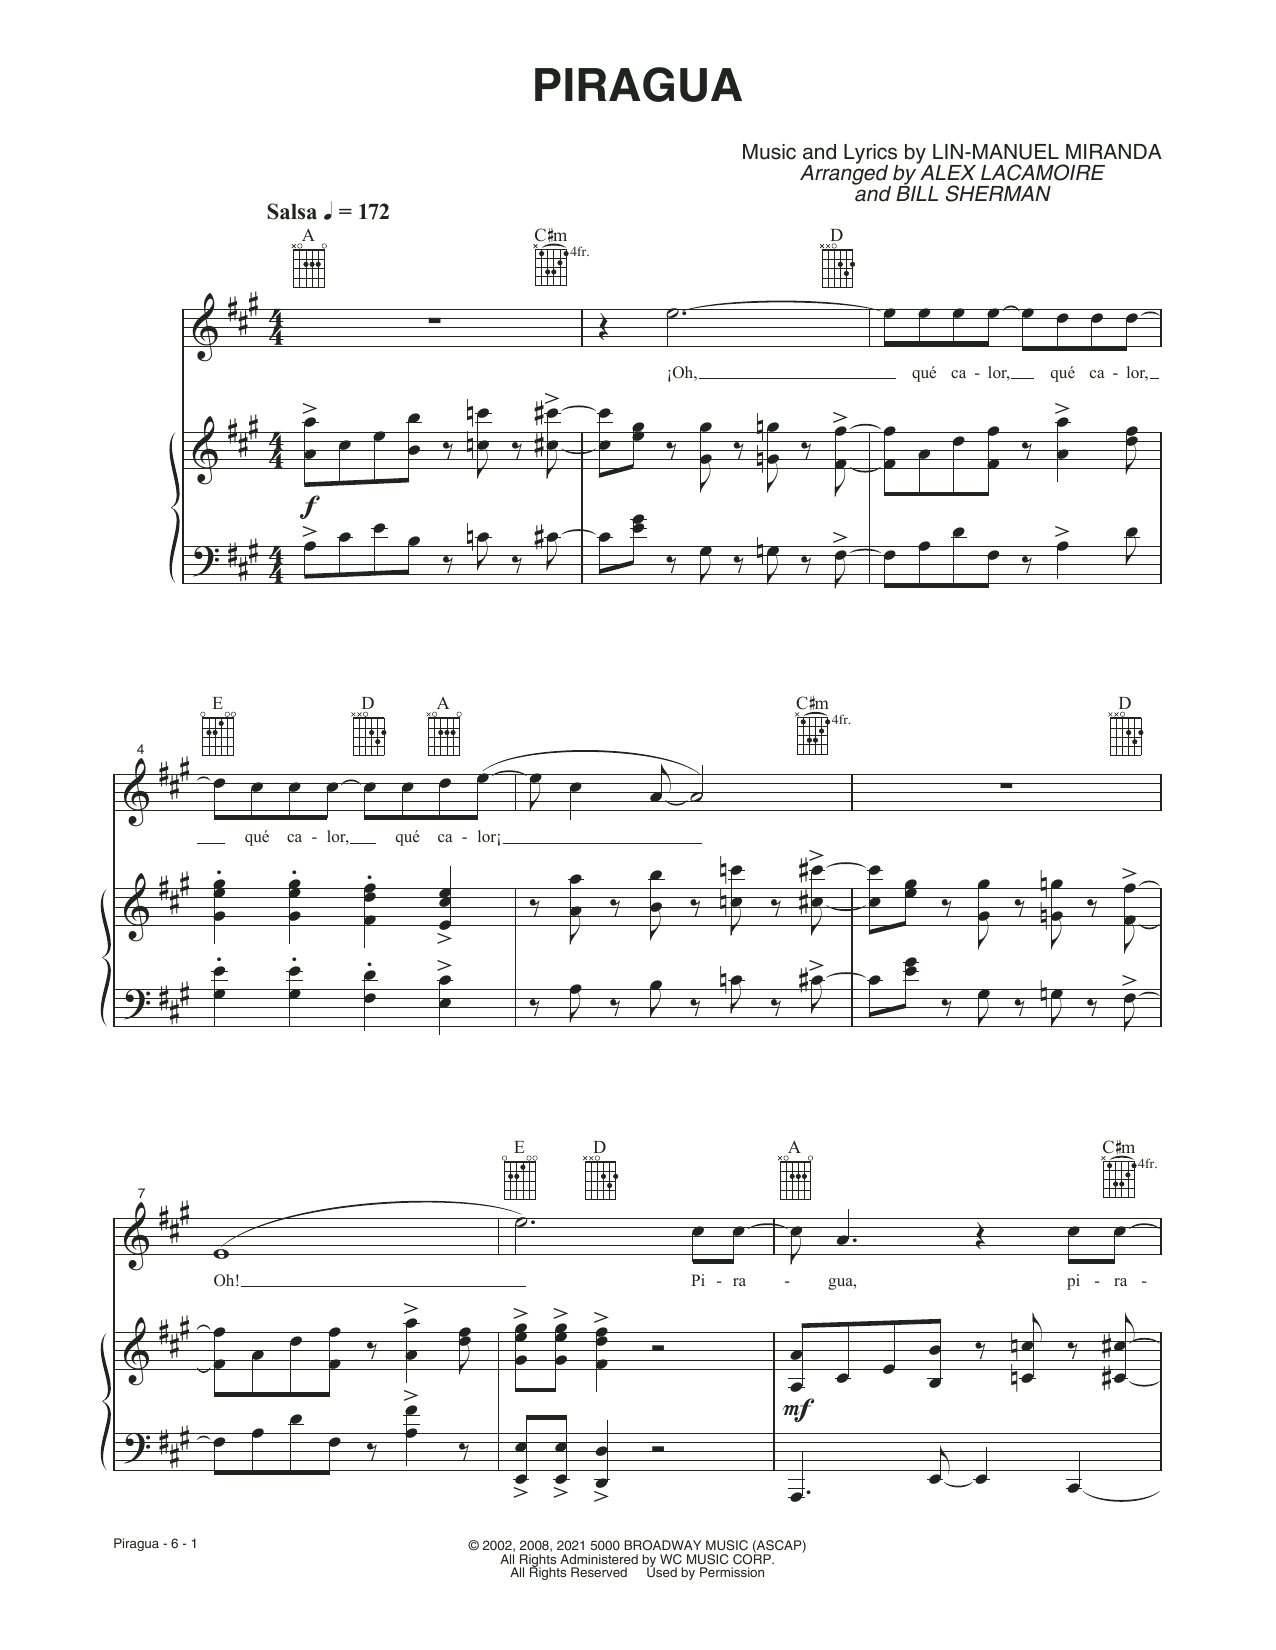 Download Lin-Manuel Miranda Piragua (from the Motion Picture In The Sheet Music